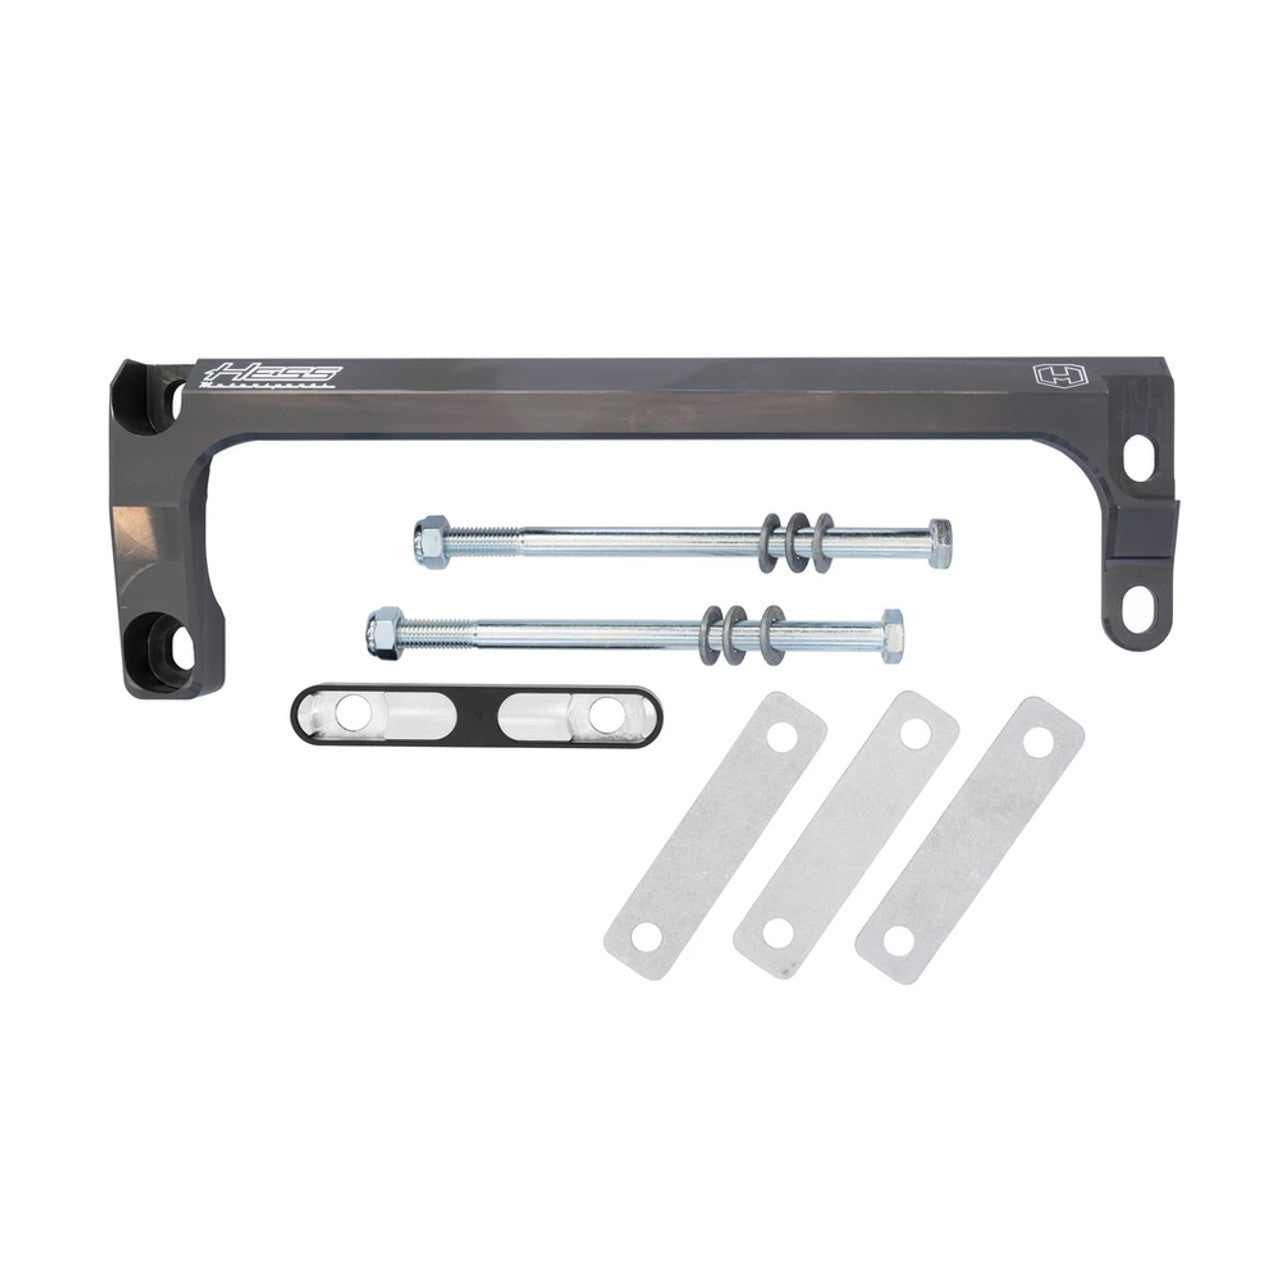 Hess Can-Am X3 Rack Support